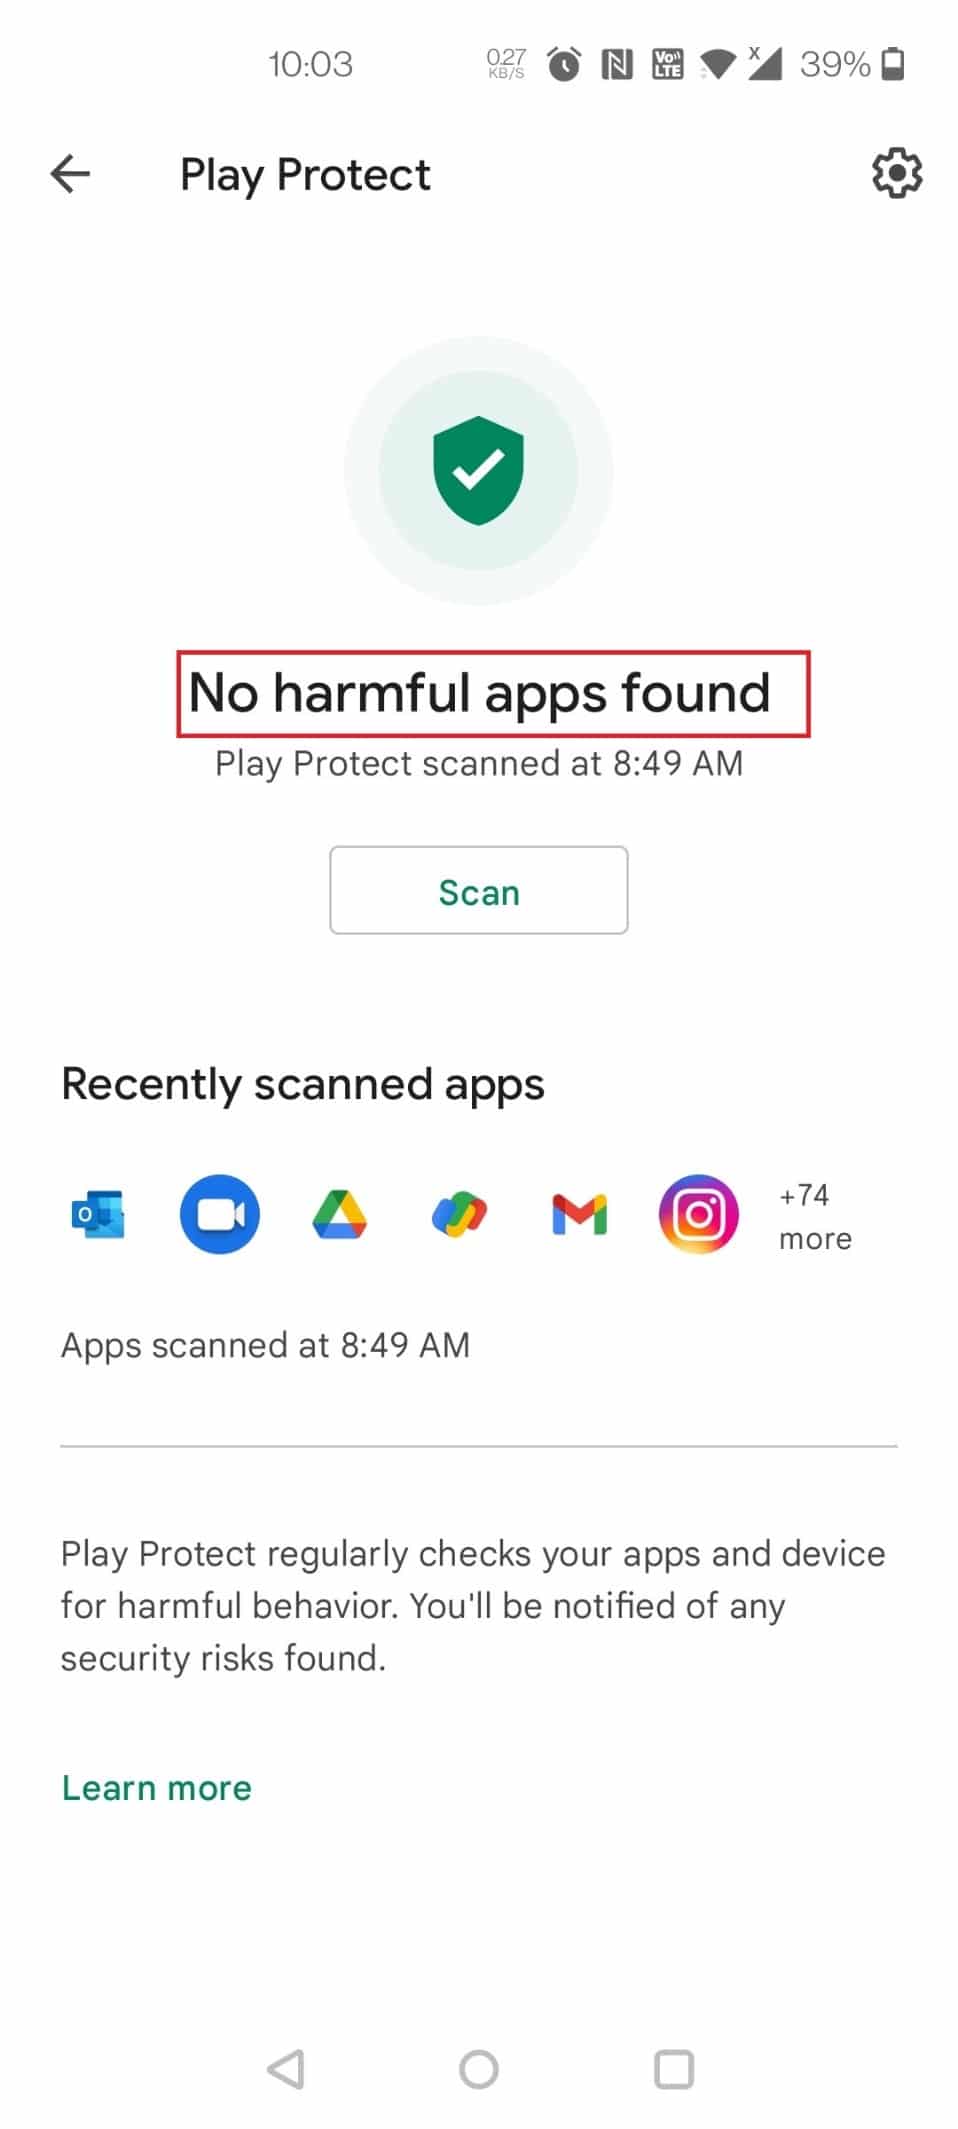 If there are no harmful apps, it will display No harmful apps found